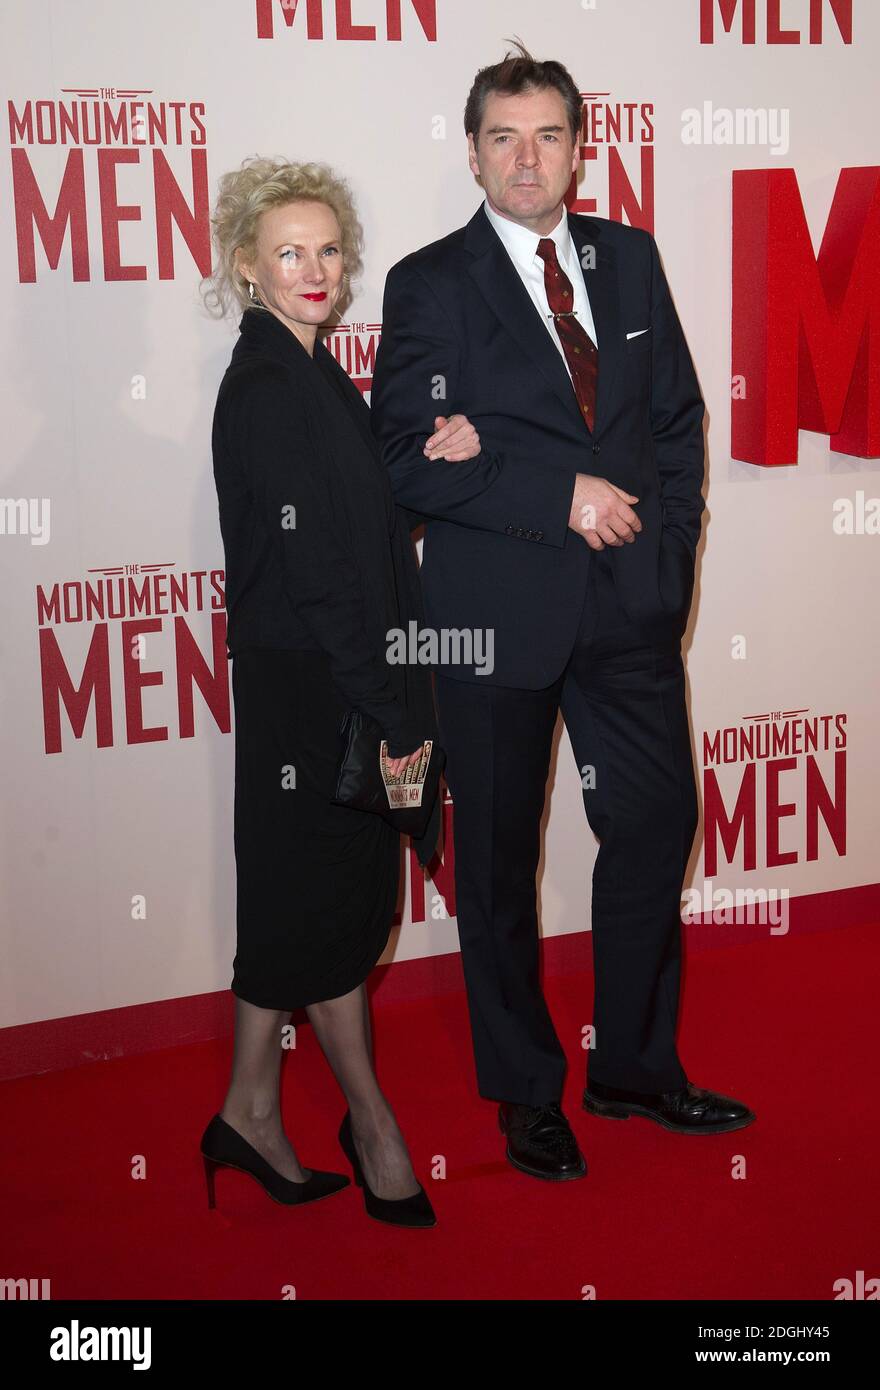 Brendan Coyle and Joy Harrison arriving at the UK Premiere of The Monuments Men, Odeon Leicester Square, London. Stock Photo